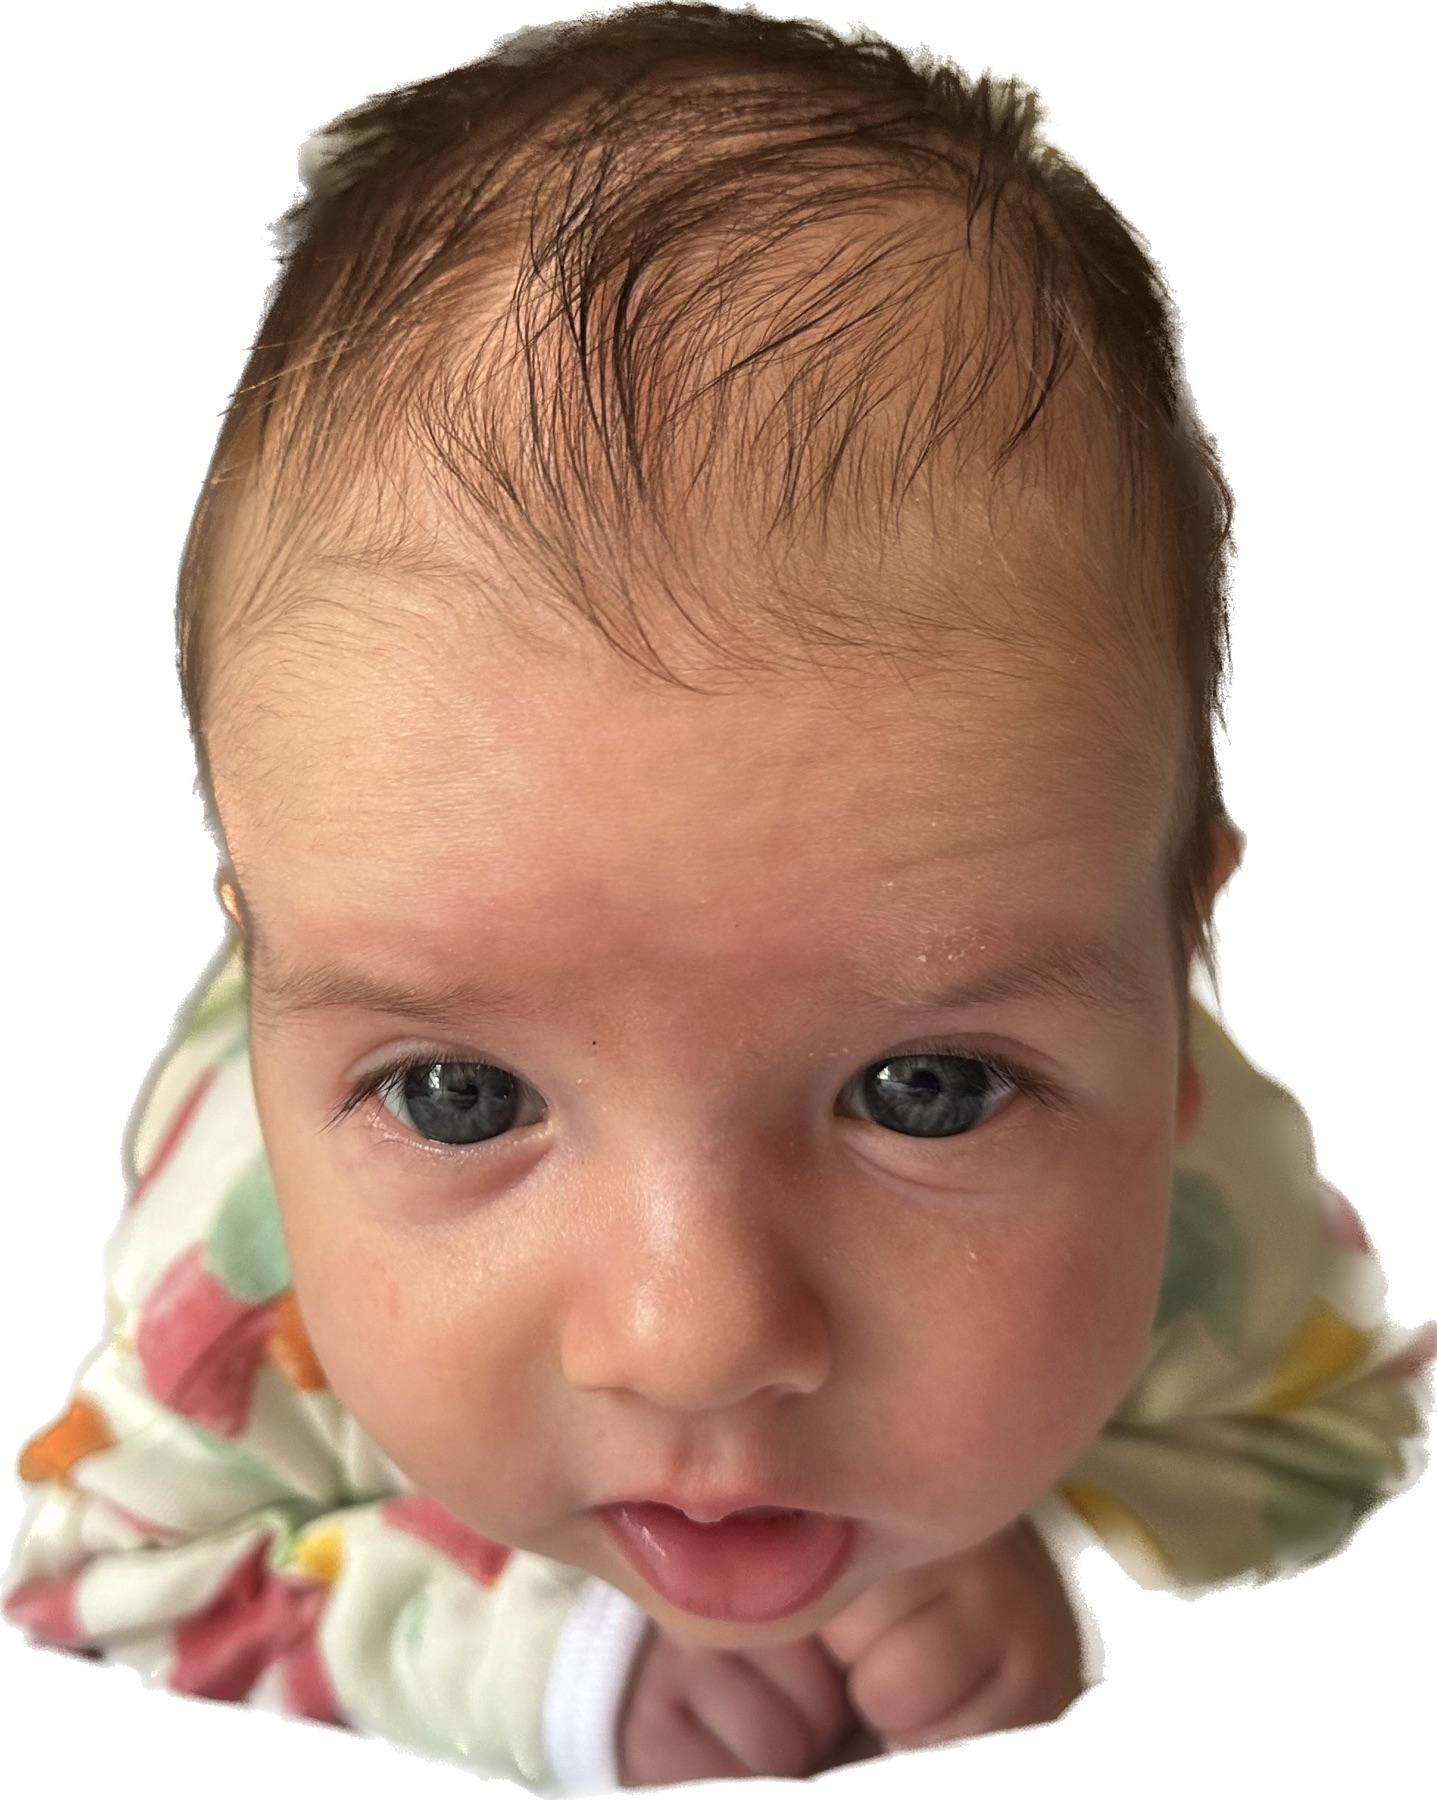 Thanks to iOS for this perfectly Photoshoppable baby photo.